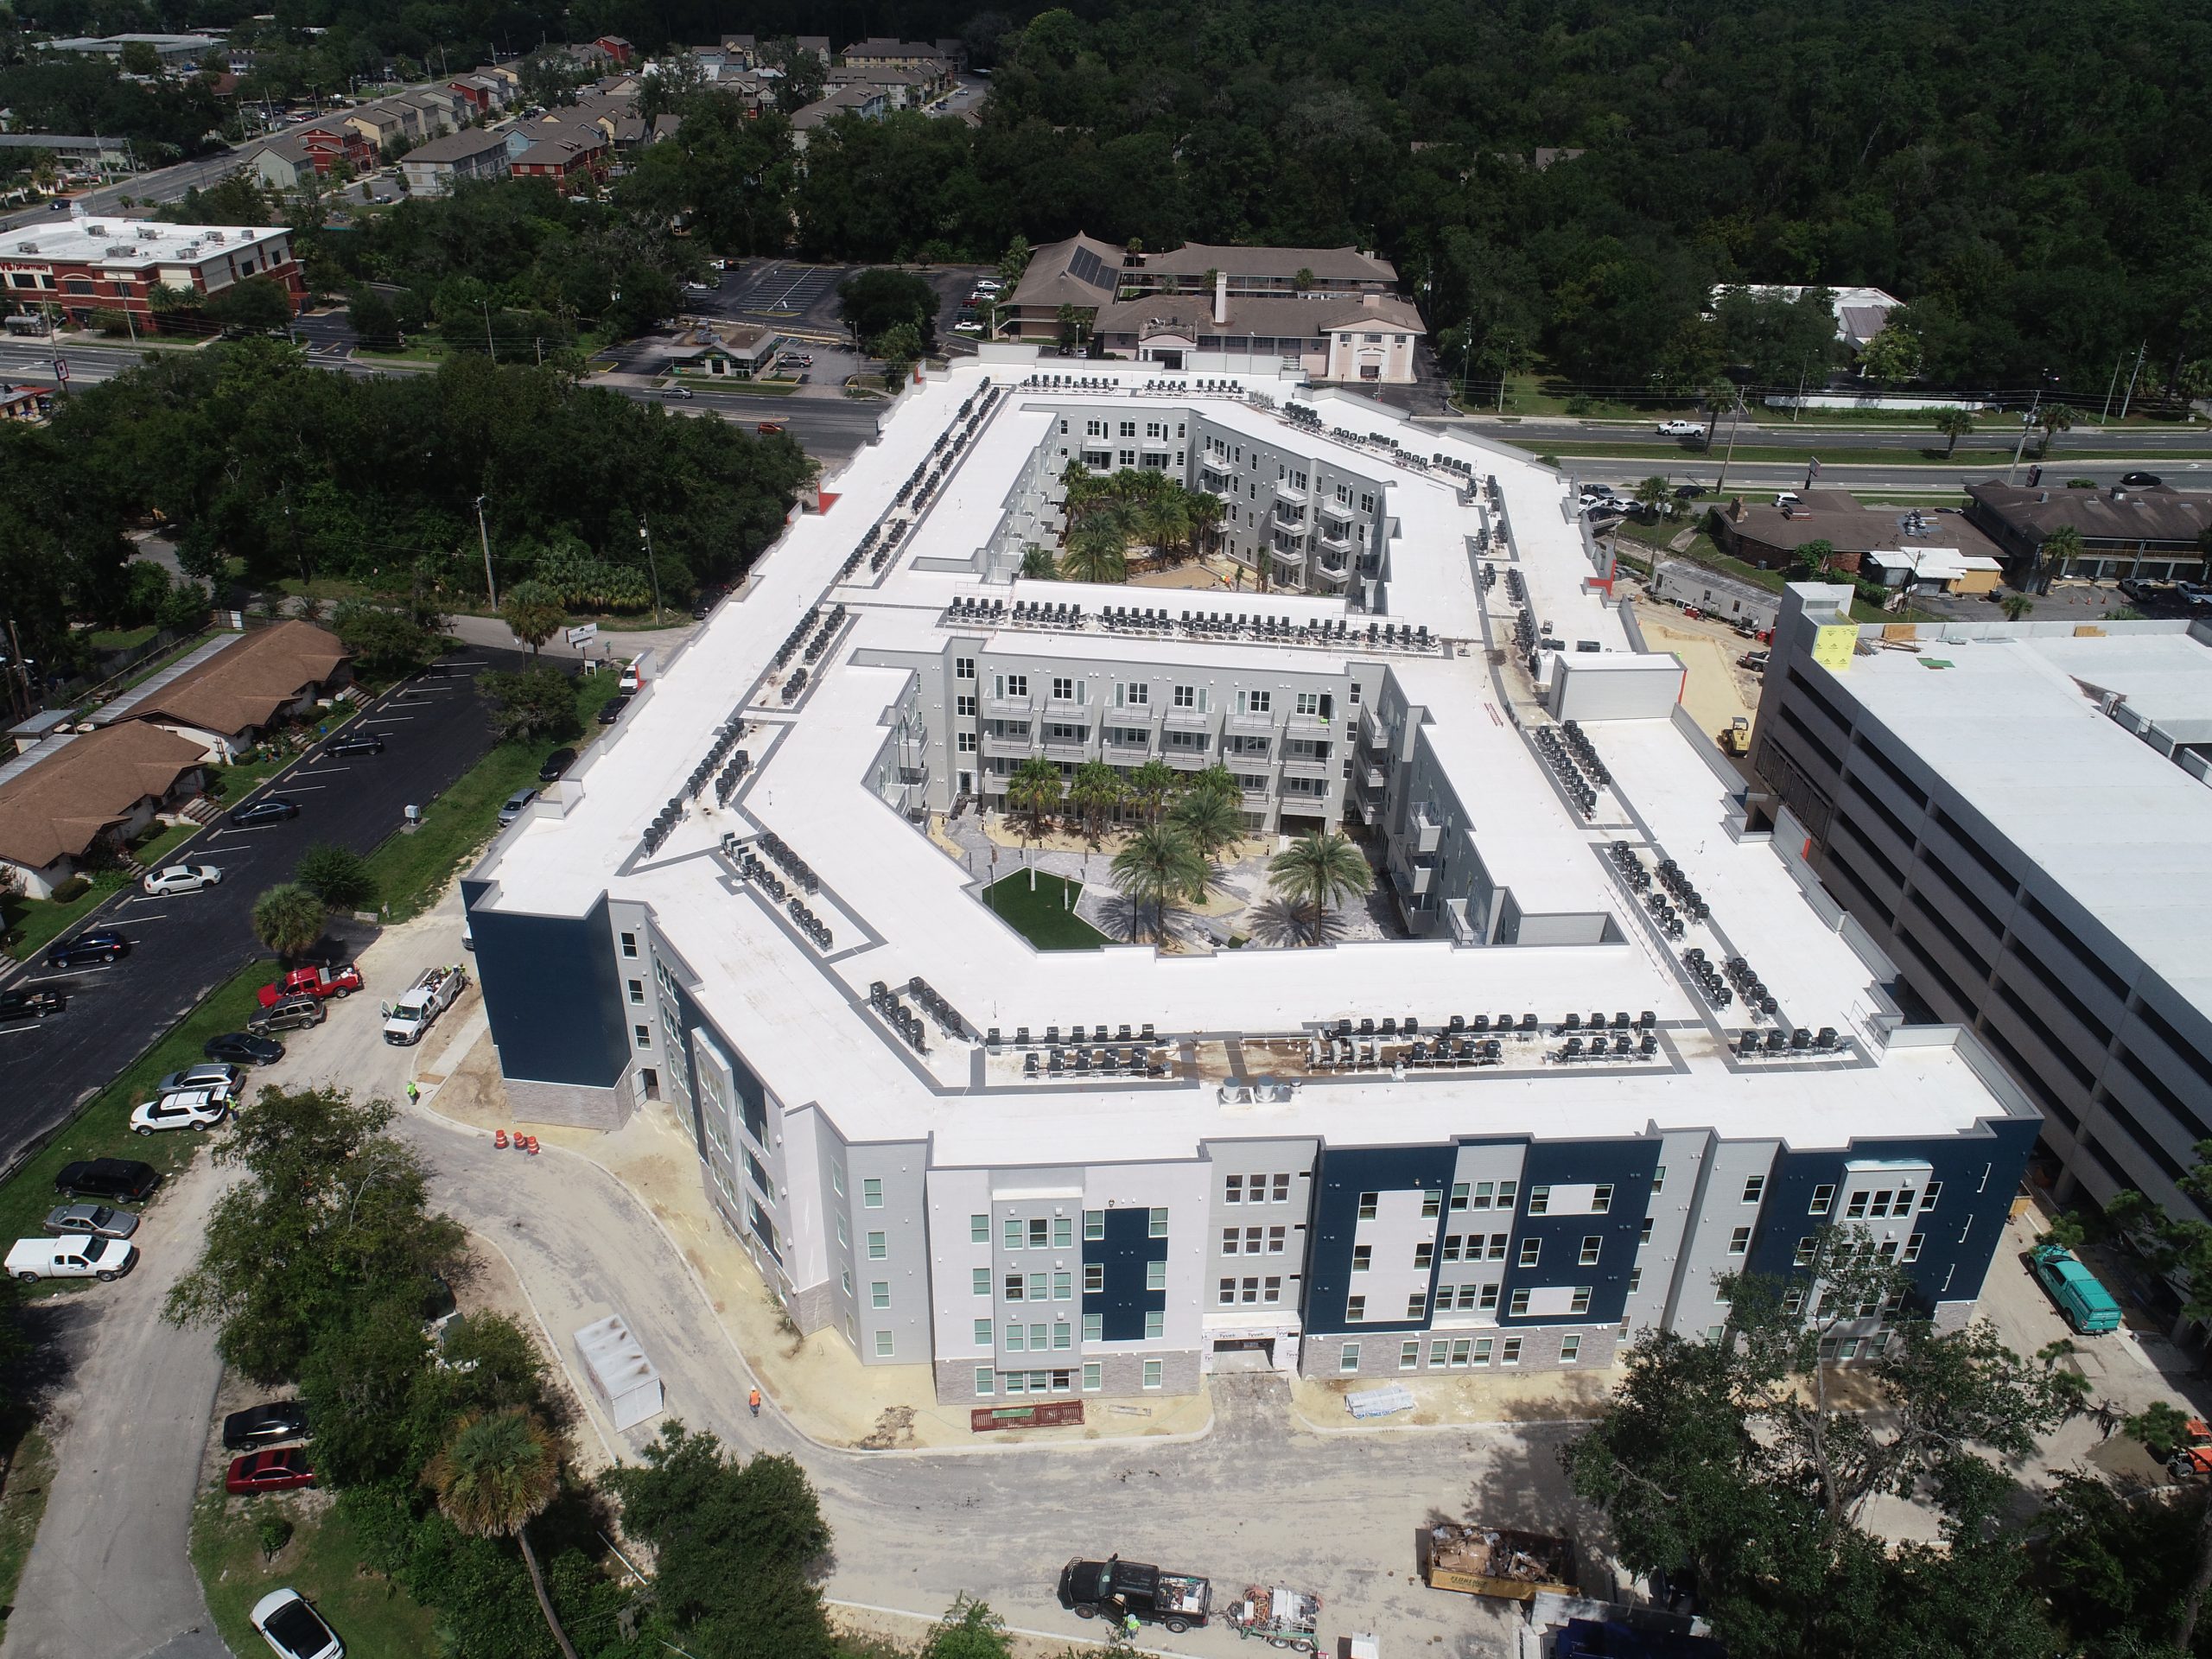 Aerial View of LIV+ Gainesville Apartments With Trees In The Center